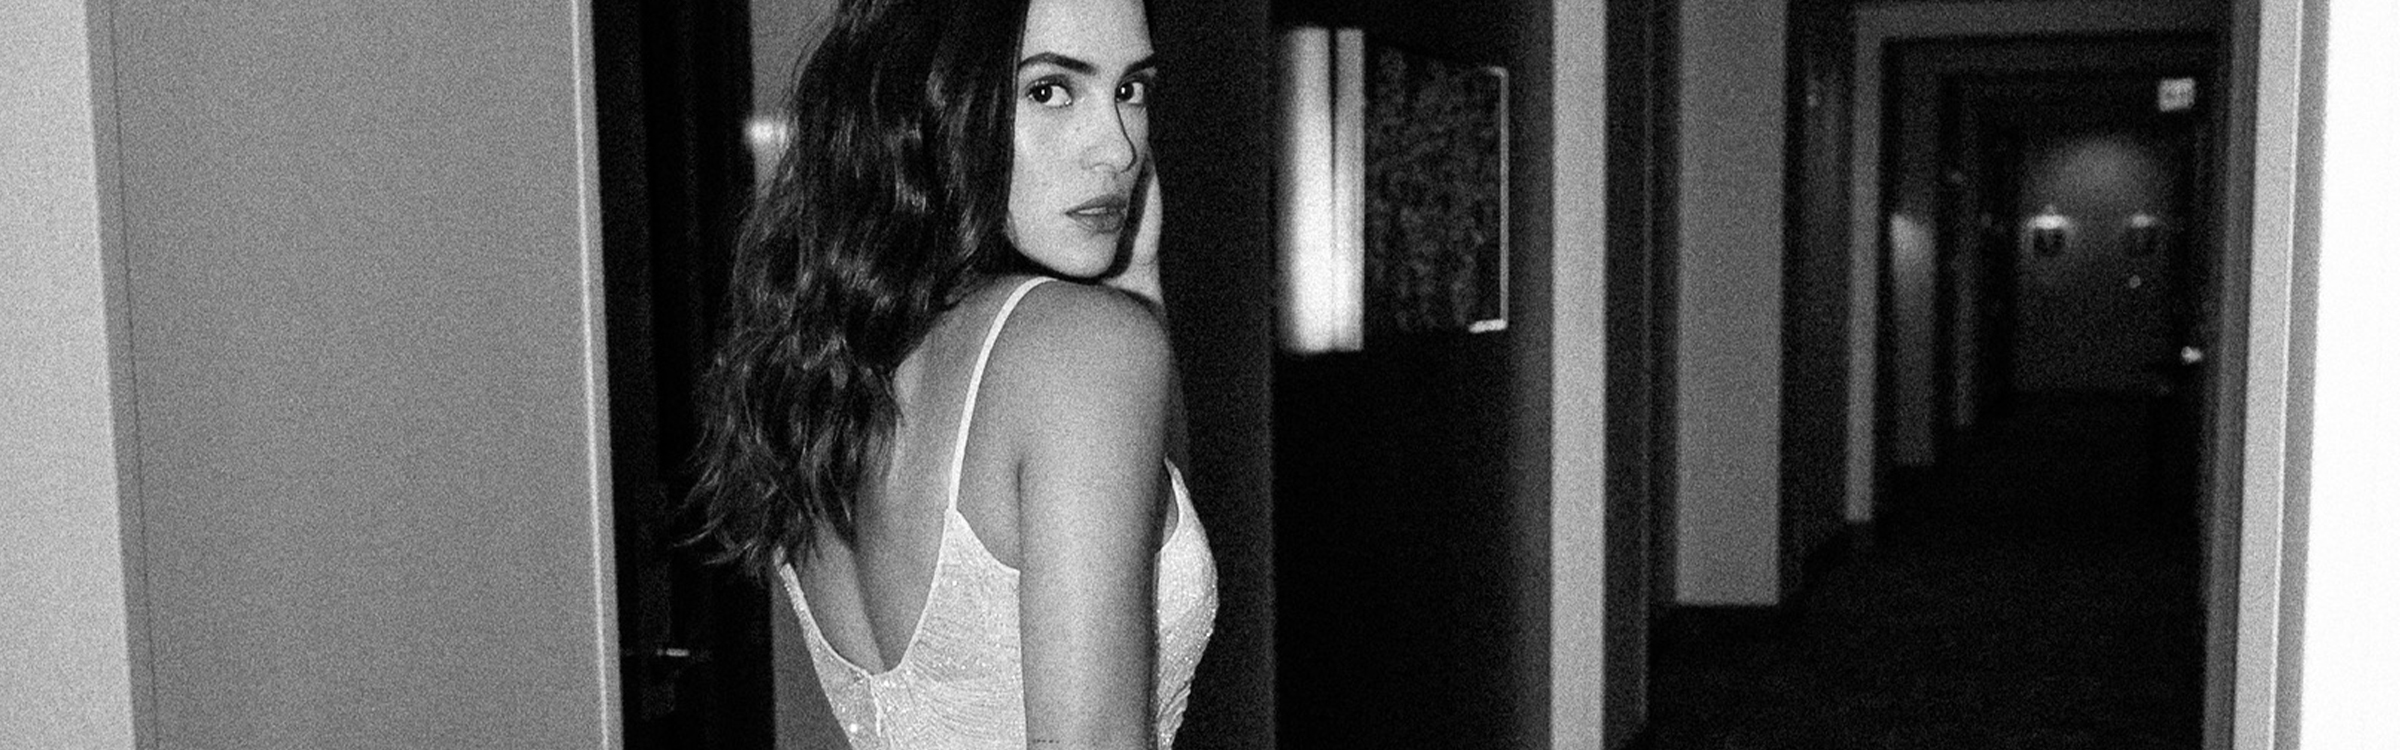 Adria Arjona Takes Us Behind the Scenes of Her Father of the Bride Premiere Look